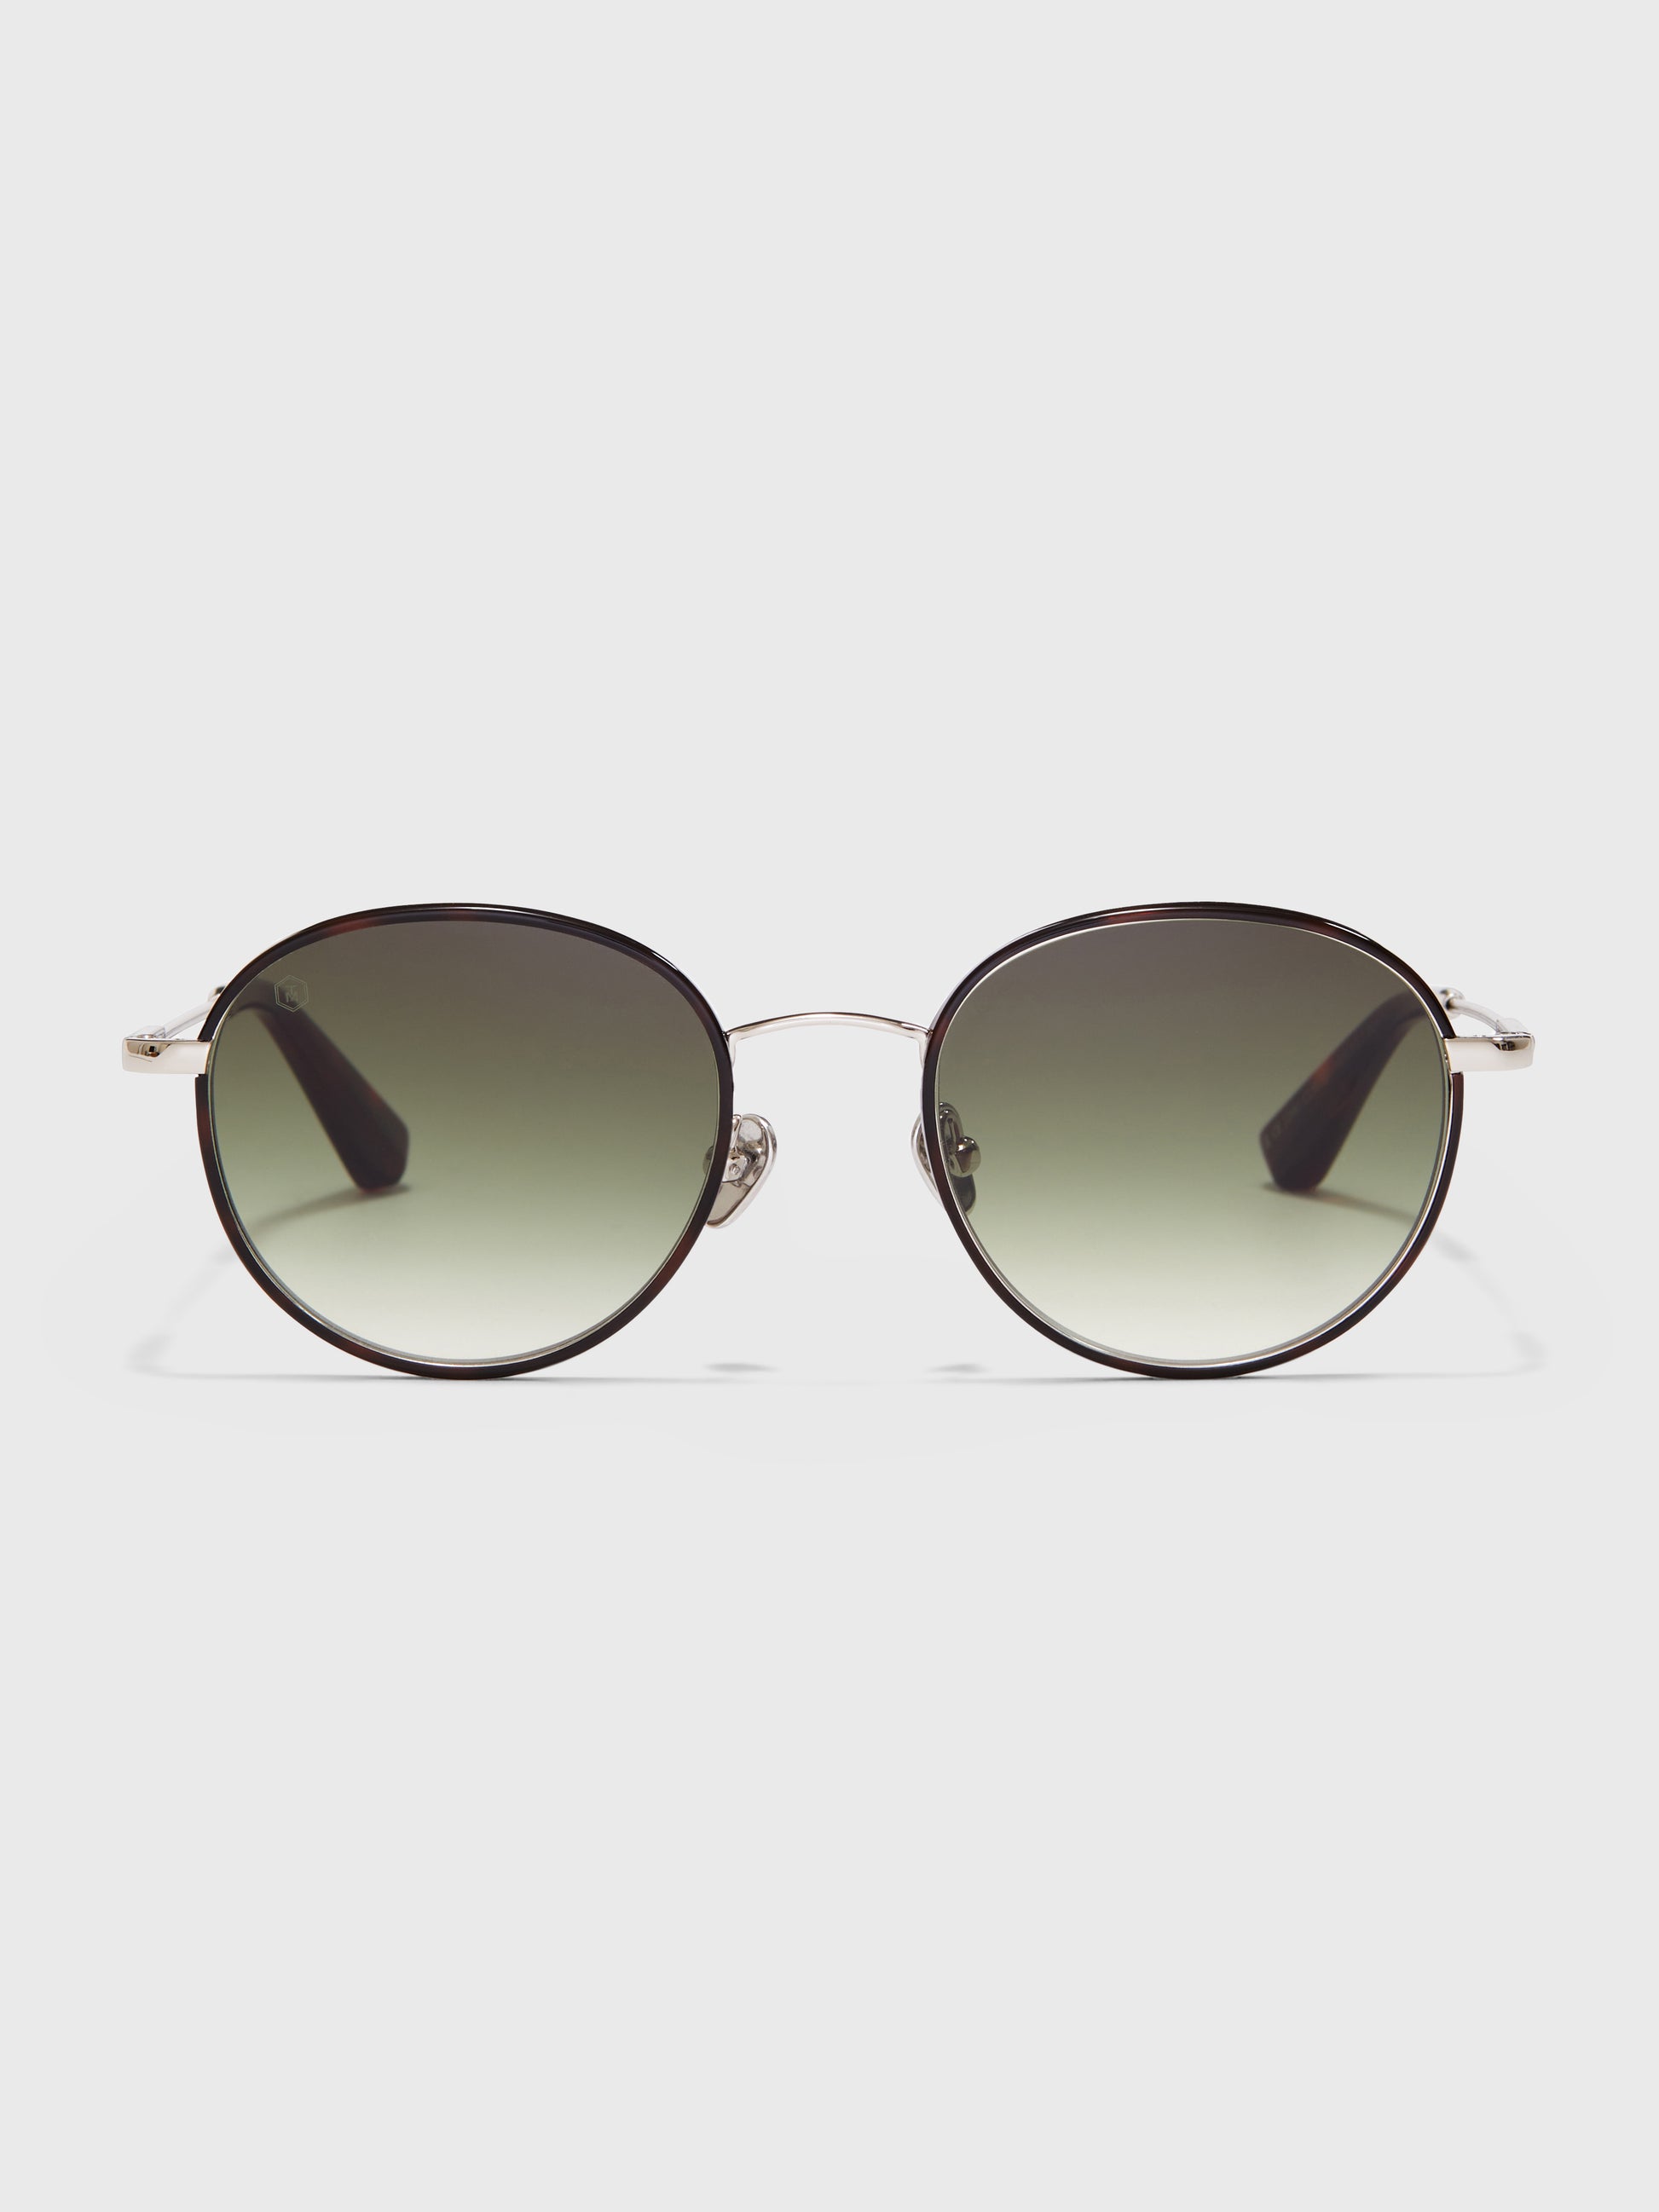 Image 1 of Bonchurch Sunglasses by Taylor Morris